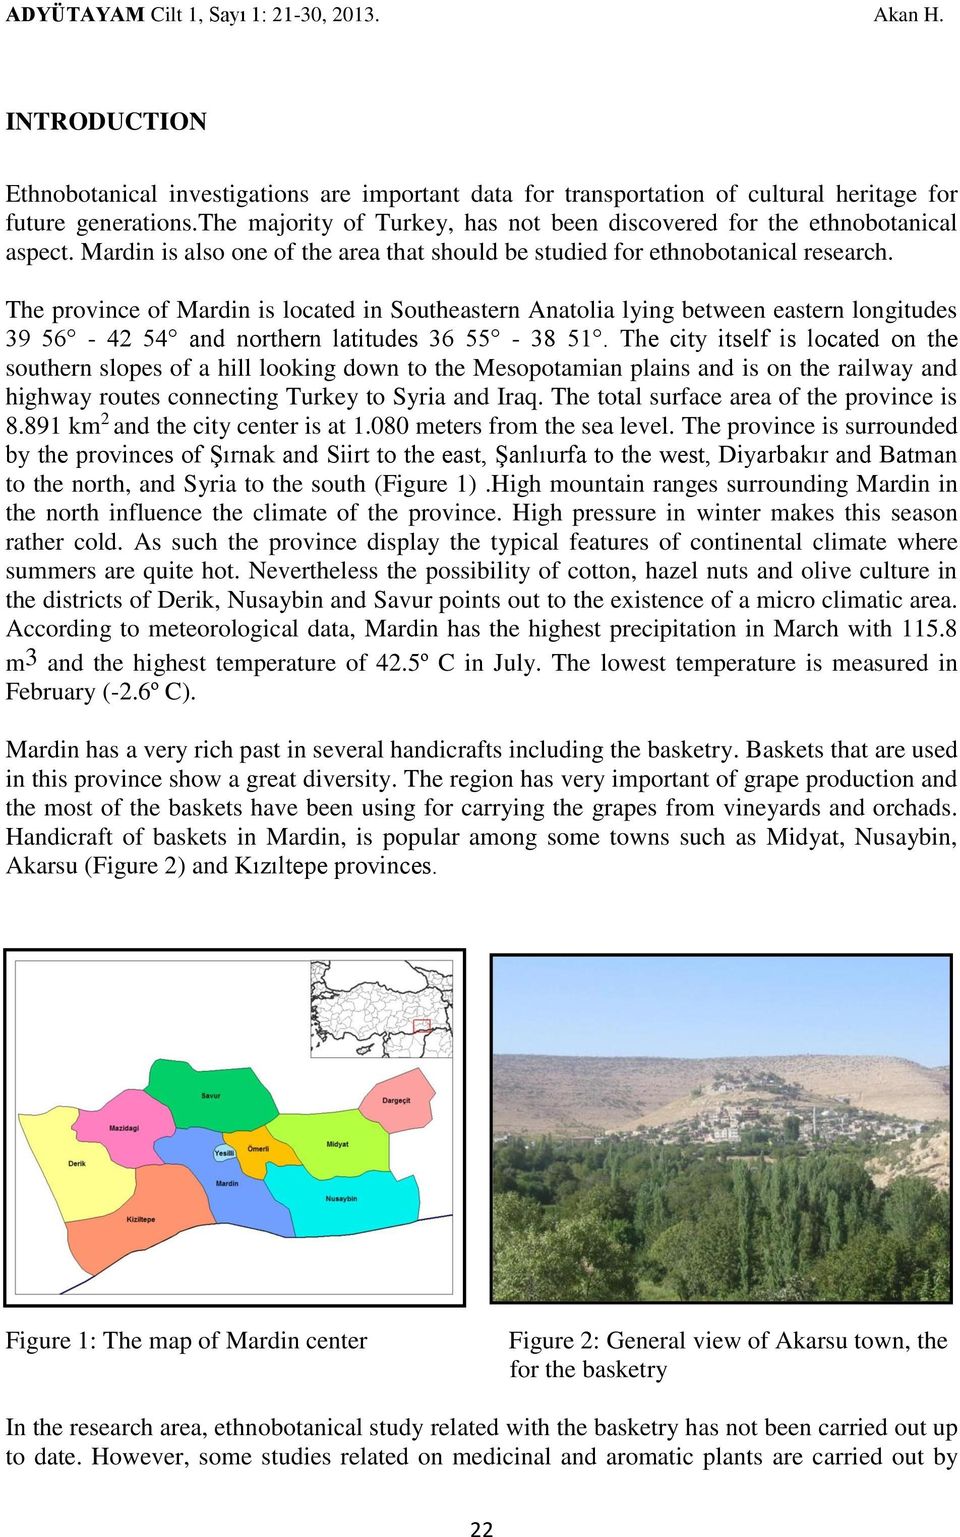 The province of Mardin is located in Southeastern Anatolia lying between eastern longitudes 39 56-42 54 and northern latitudes 36 55-38 51.